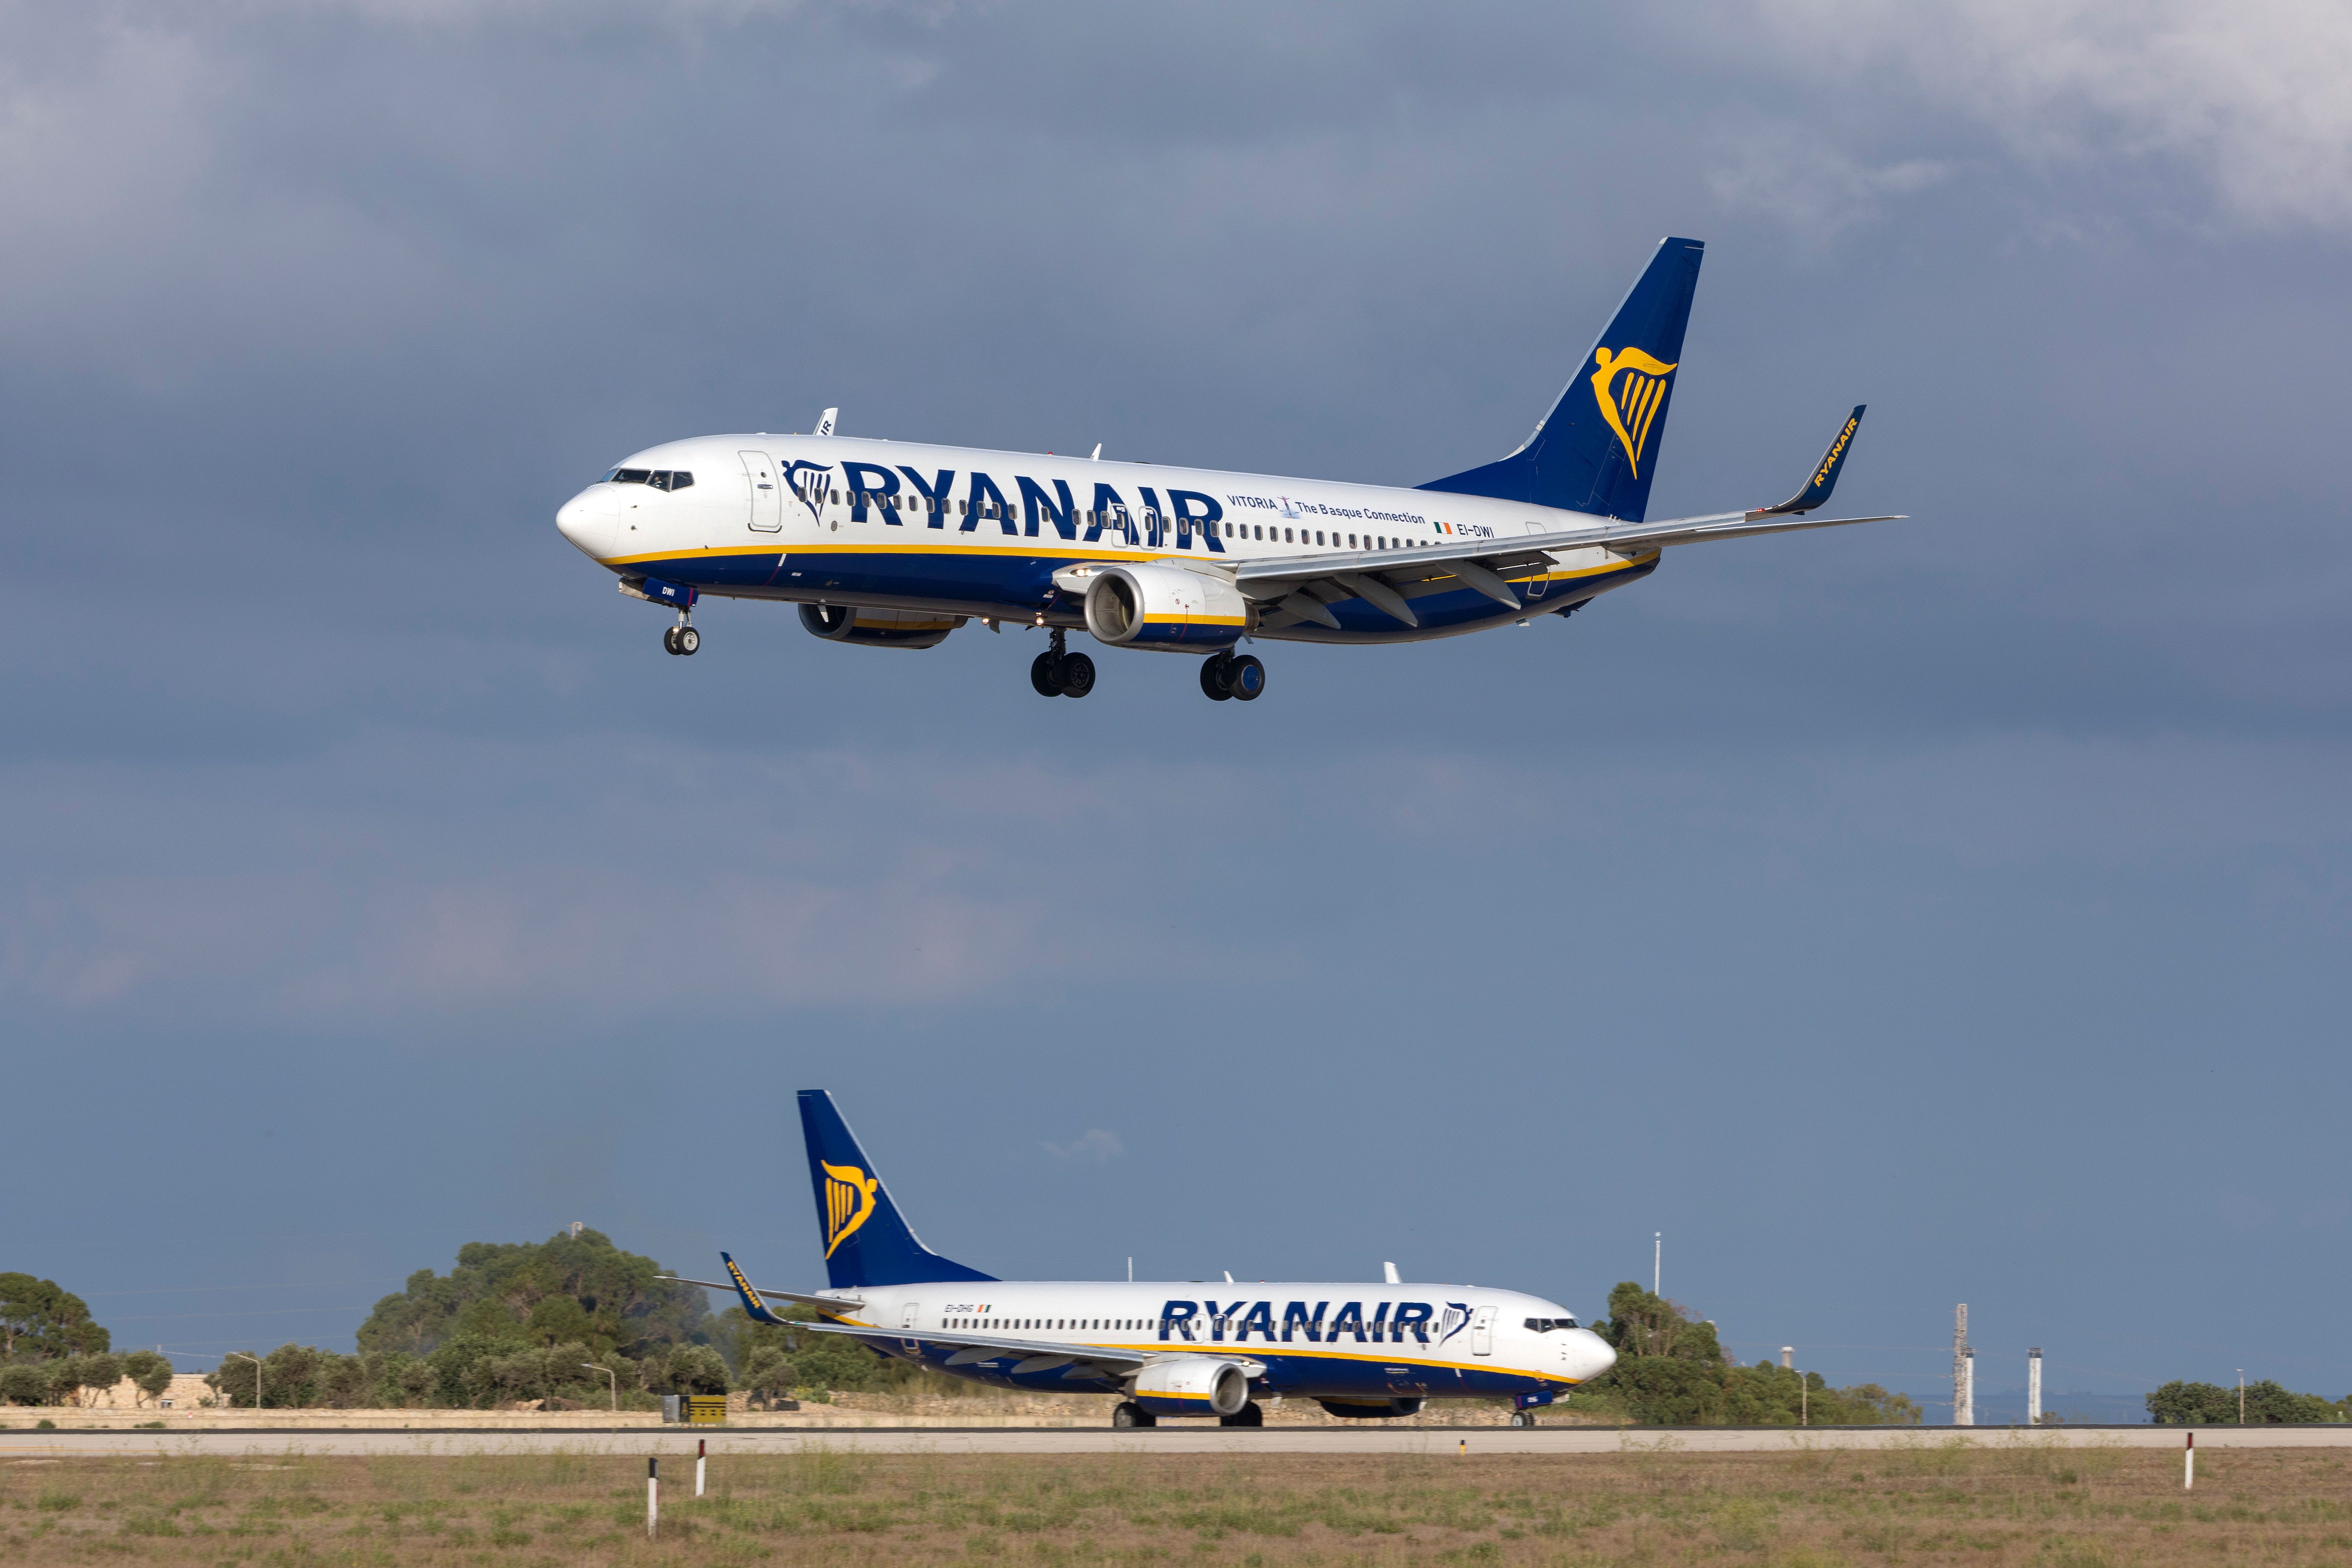 Ryanair Boeing 737 coming in to land while another Ryanair 737 waits for take off.